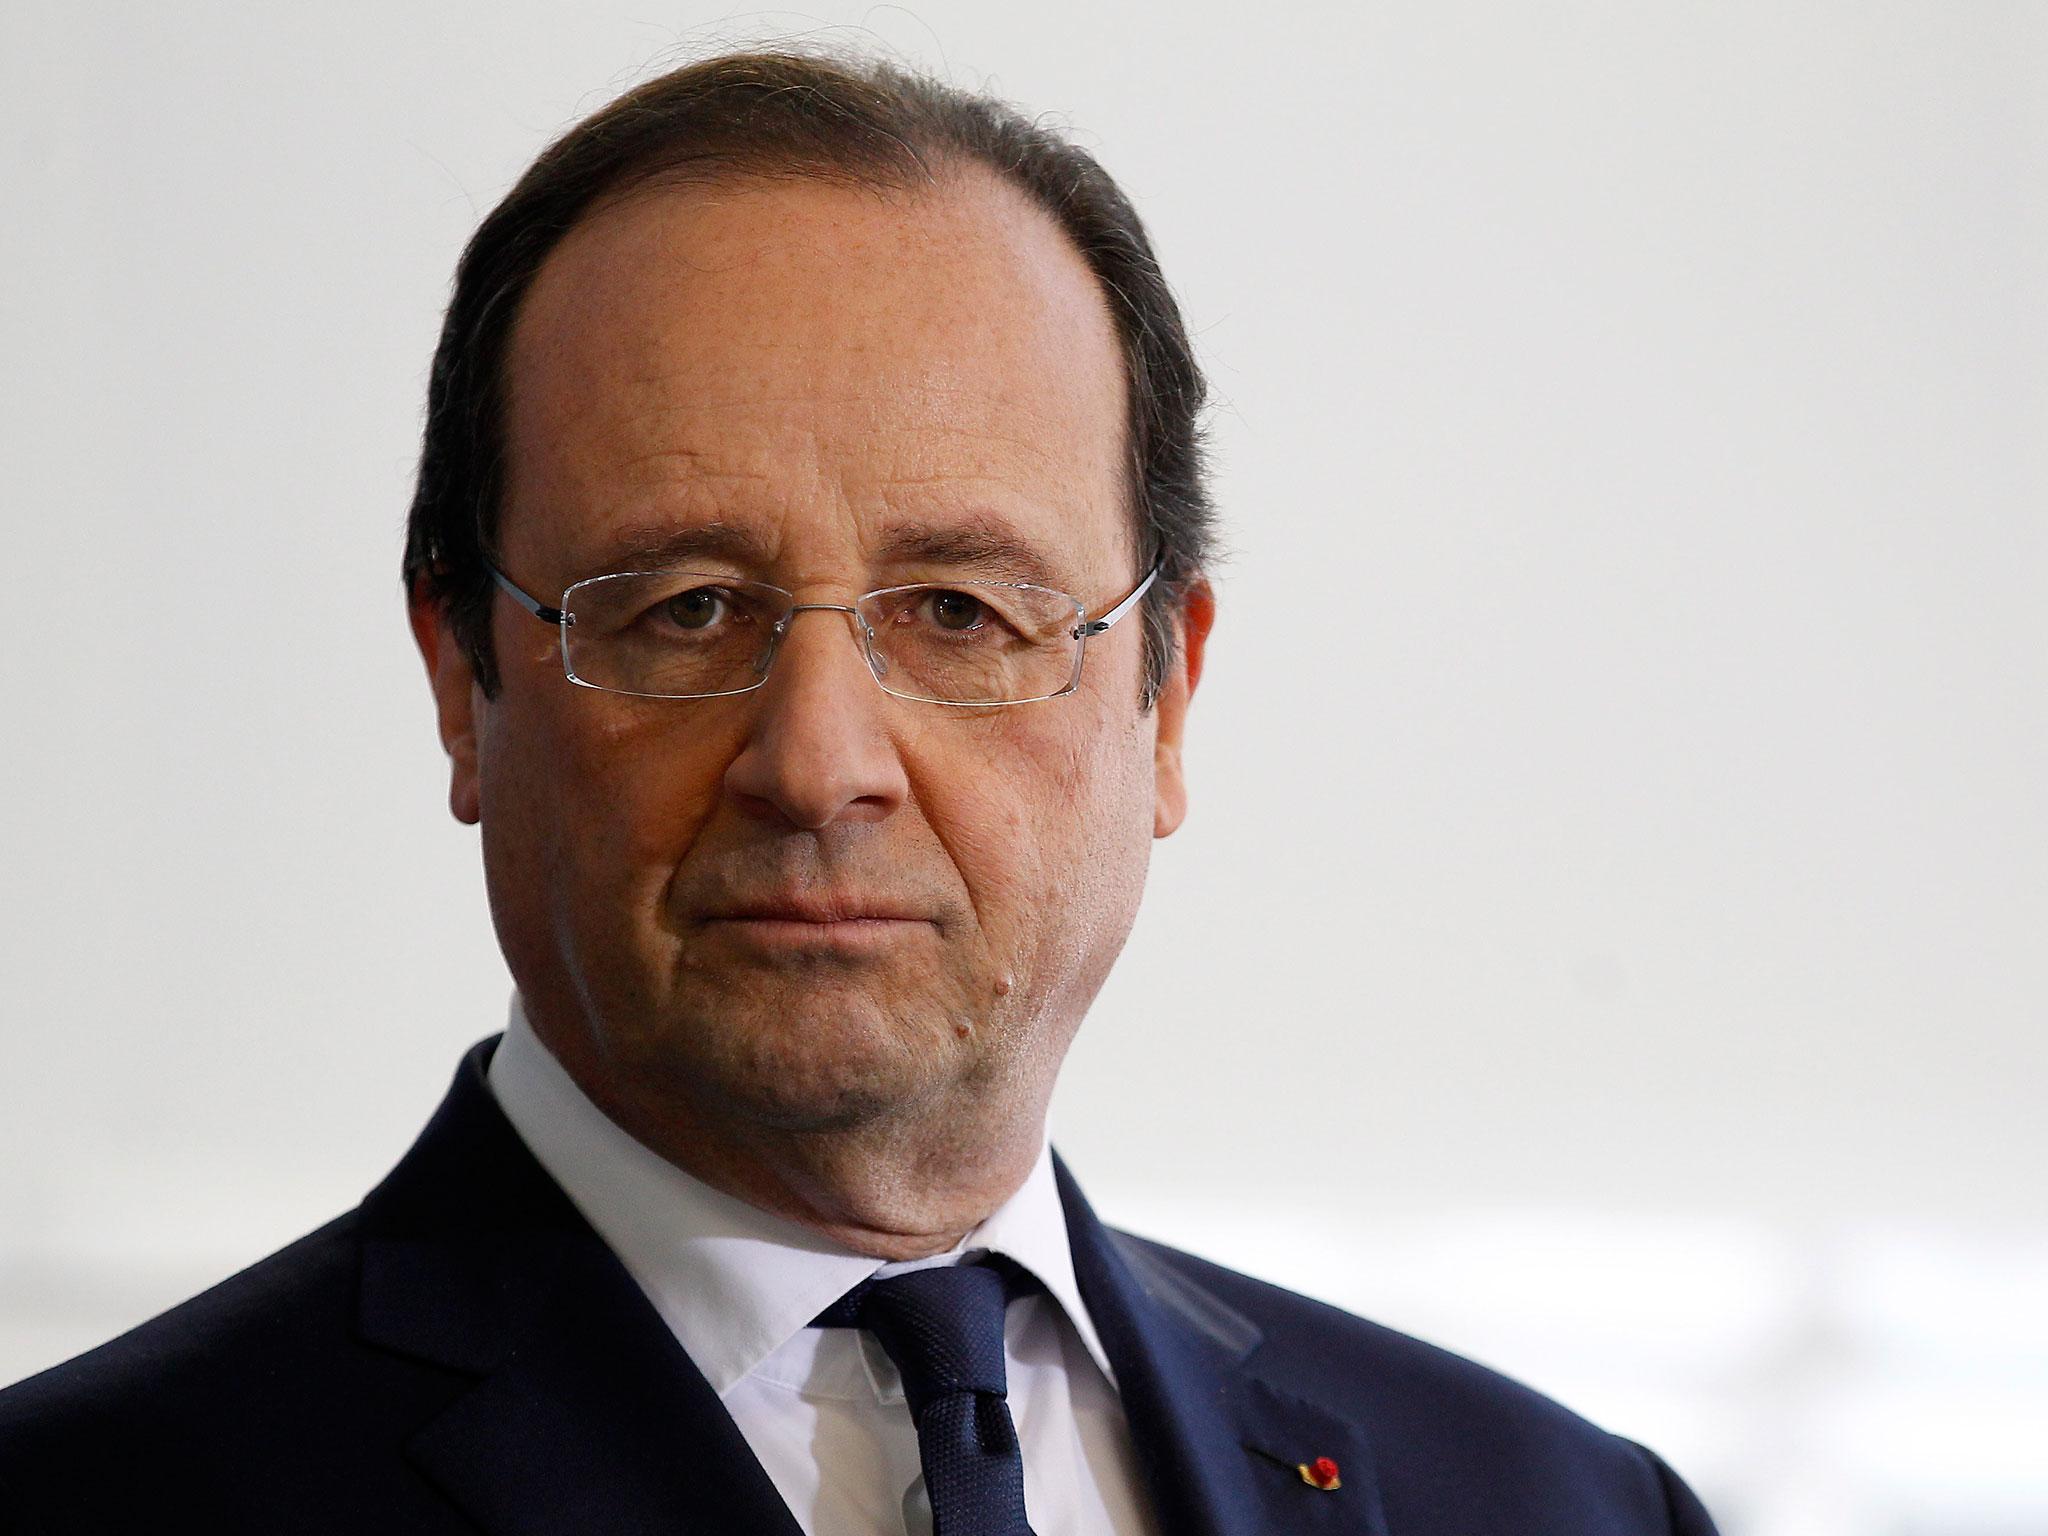 French President Francois Hollande has said the UK cannot access the EU free market without accepting the free movement of people